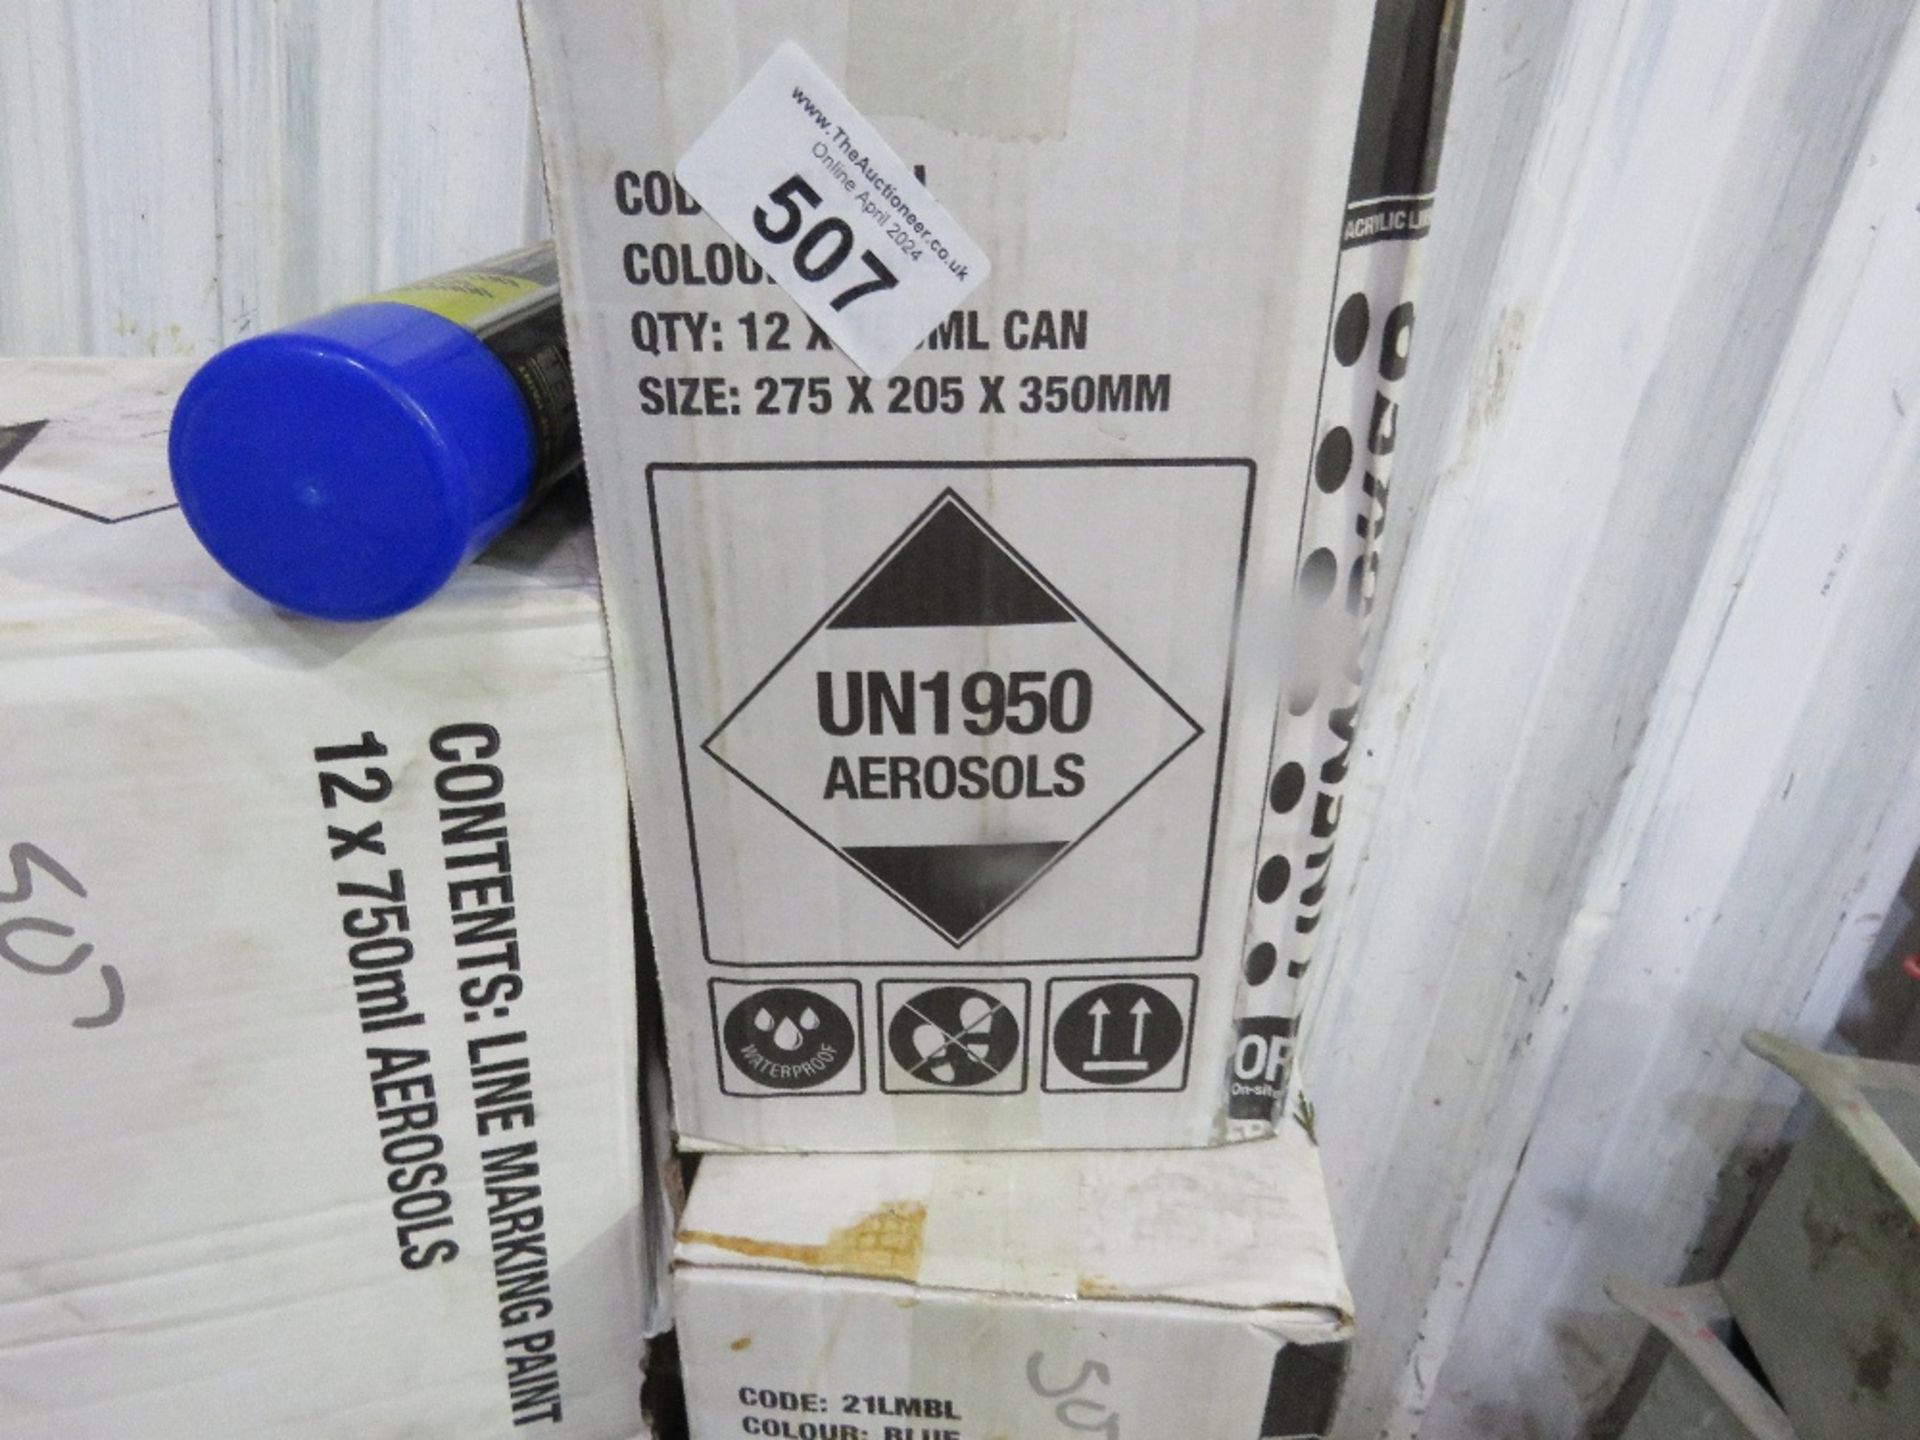 BOX OF CLEAR SILICONE SEALANT PLUS 4NO BOXES OF BLUE LINE MARKING PAINT.SOURCED FROM COMPANY LIQUIDA - Image 2 of 2